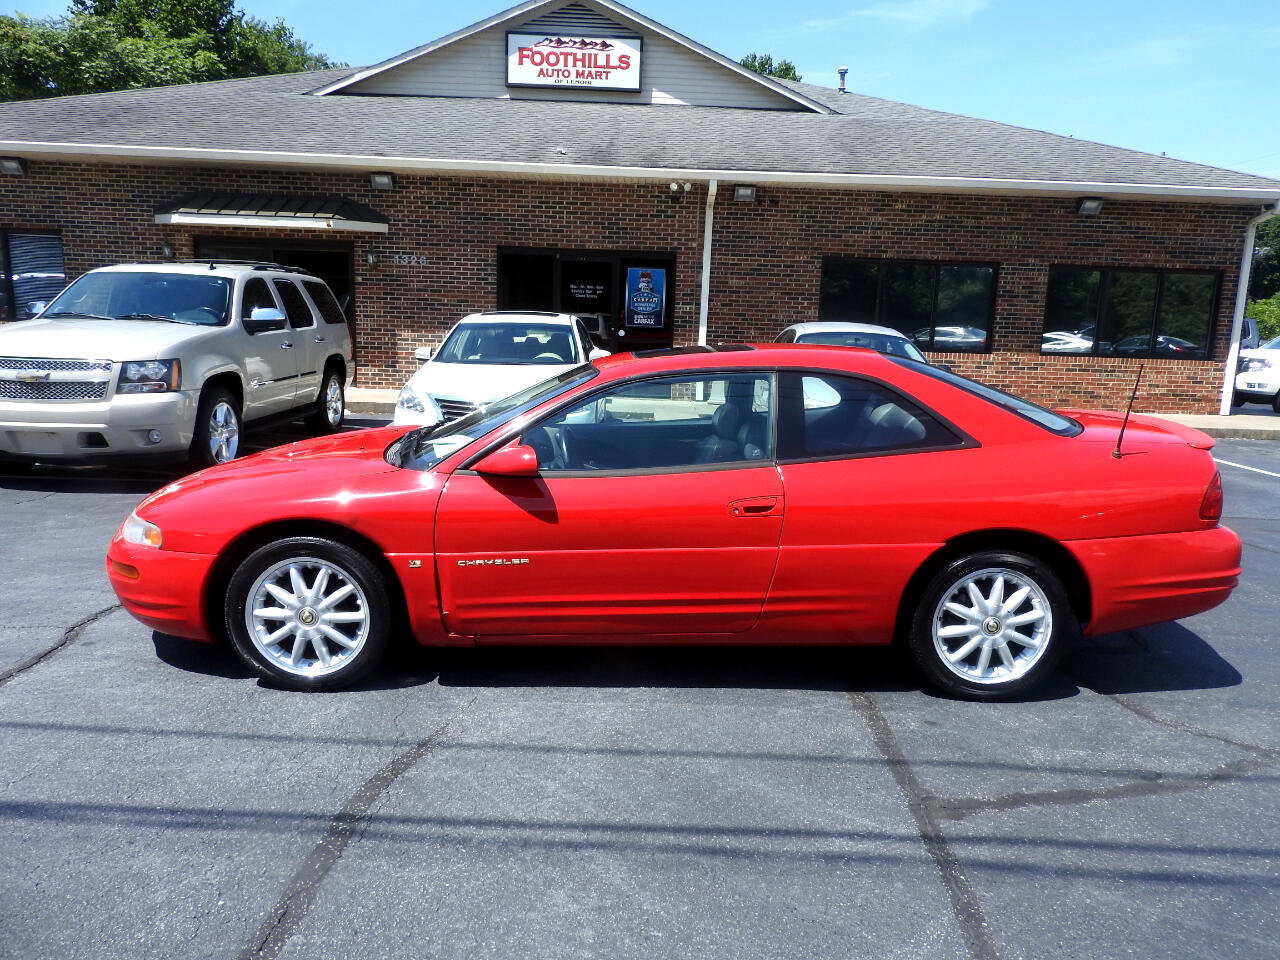 Used 1999 Chrysler Sebring Coupes for Sale Right Now - Autotrader